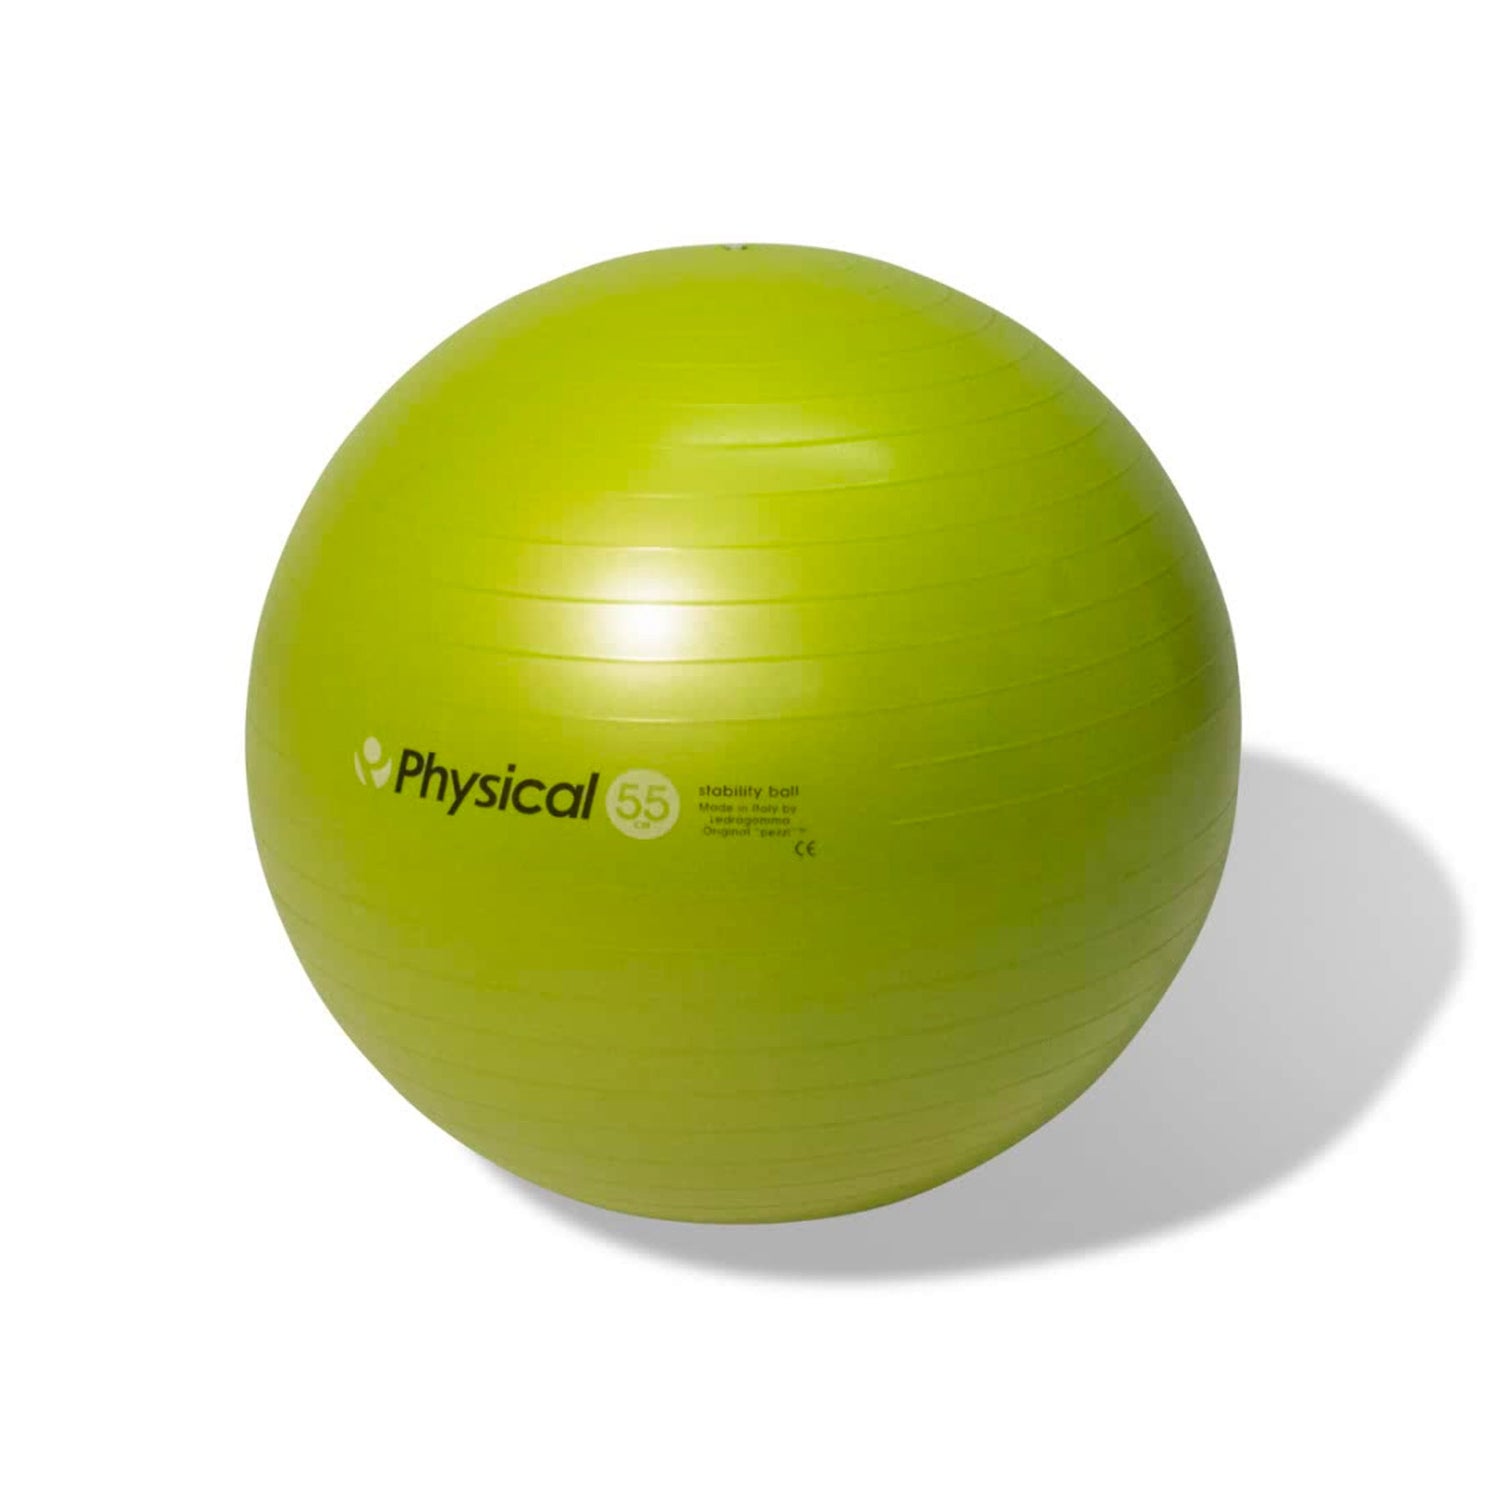 a green 55cm stability exercise ball